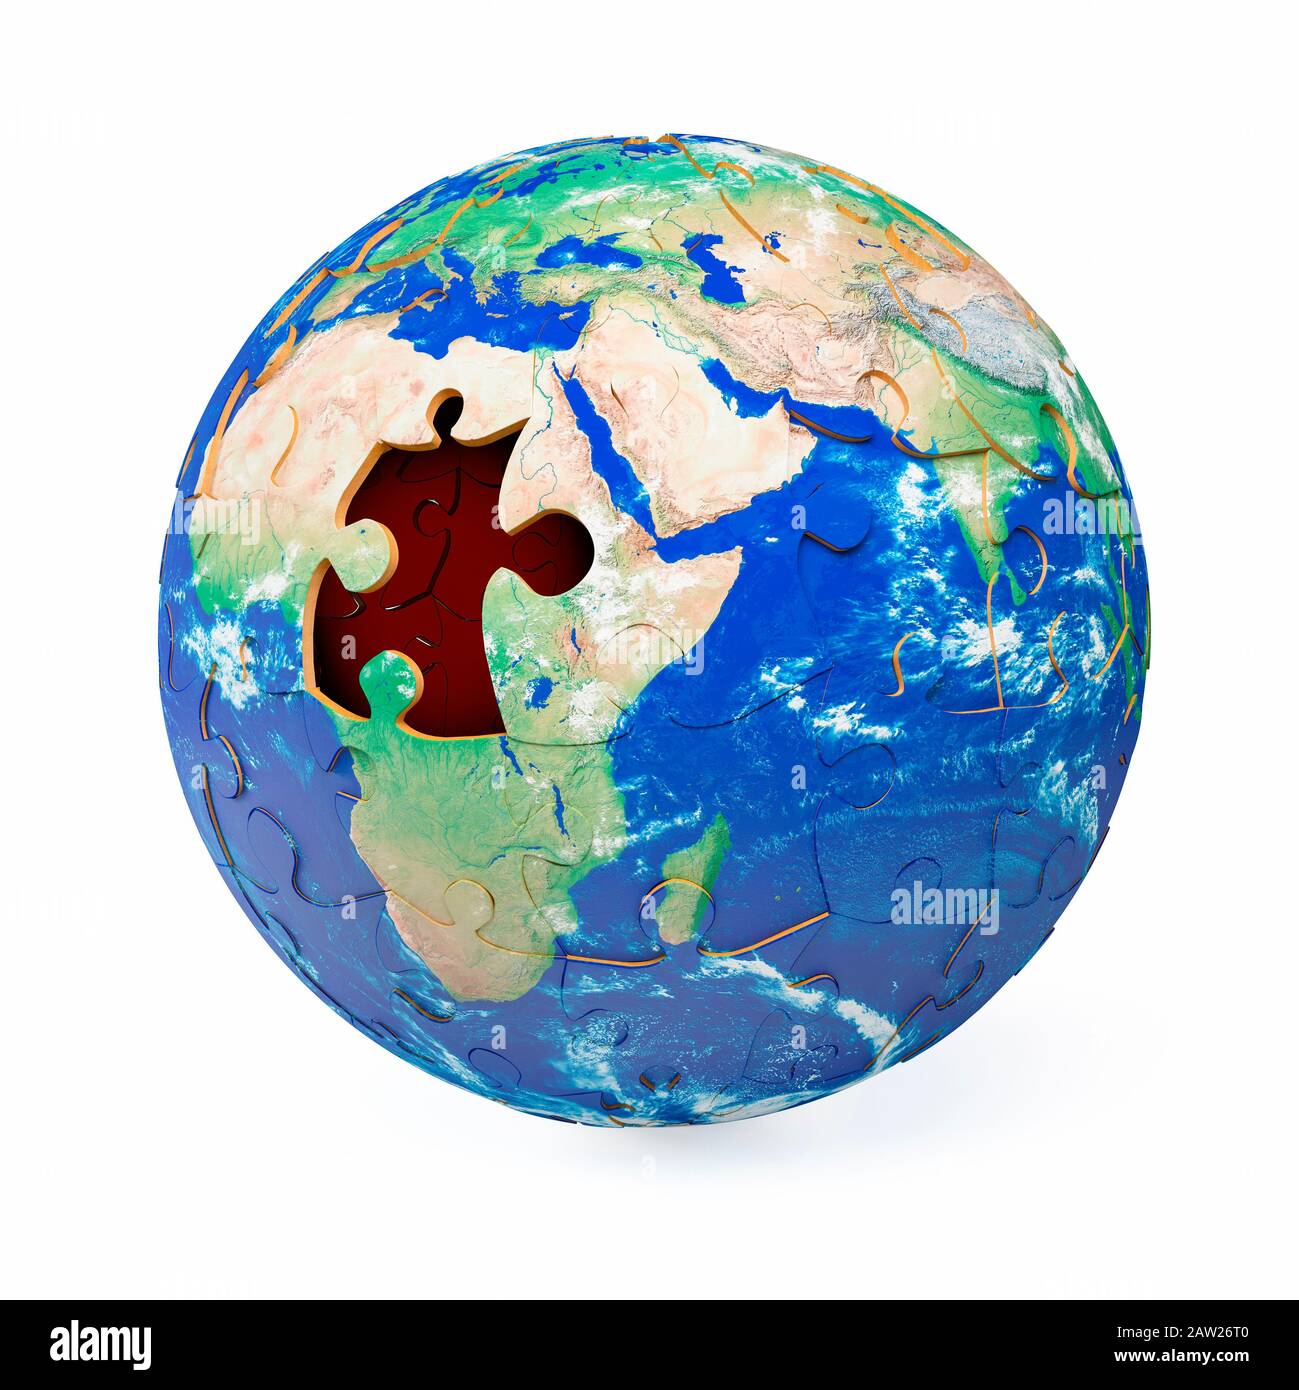 Globe jigsaw puzzle showing a piece missing over the continent of Africa on planet earth Stock Photo